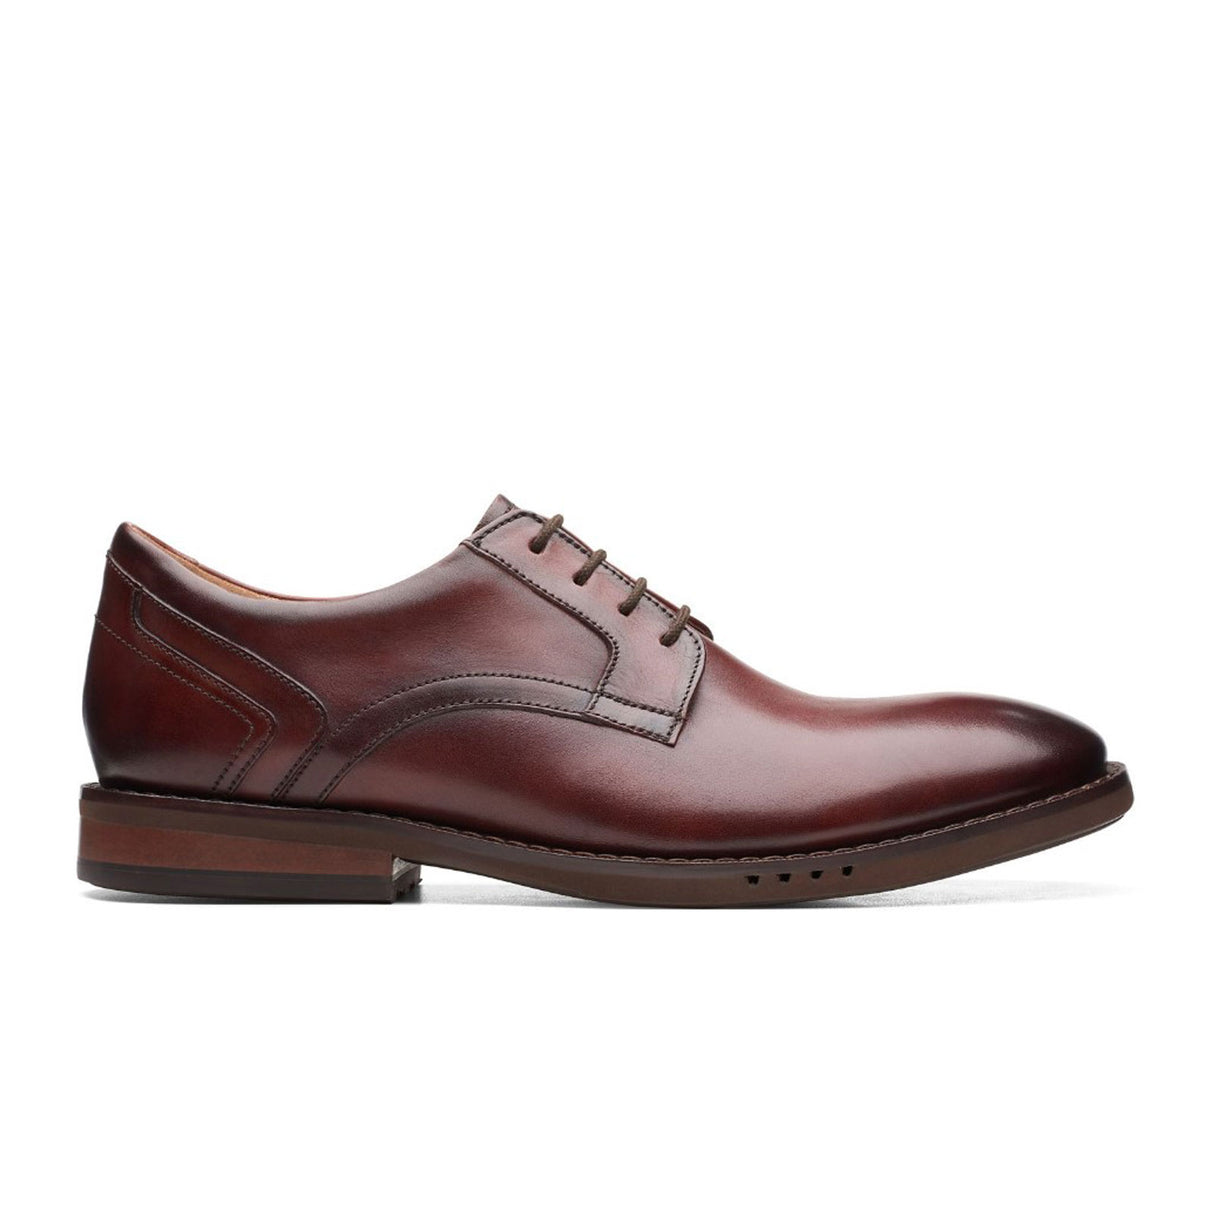 Clarks Un Hugh Lace Oxford (Men) - Brown Leather Dress-Casual - Oxfords - The Heel Shoe Fitters